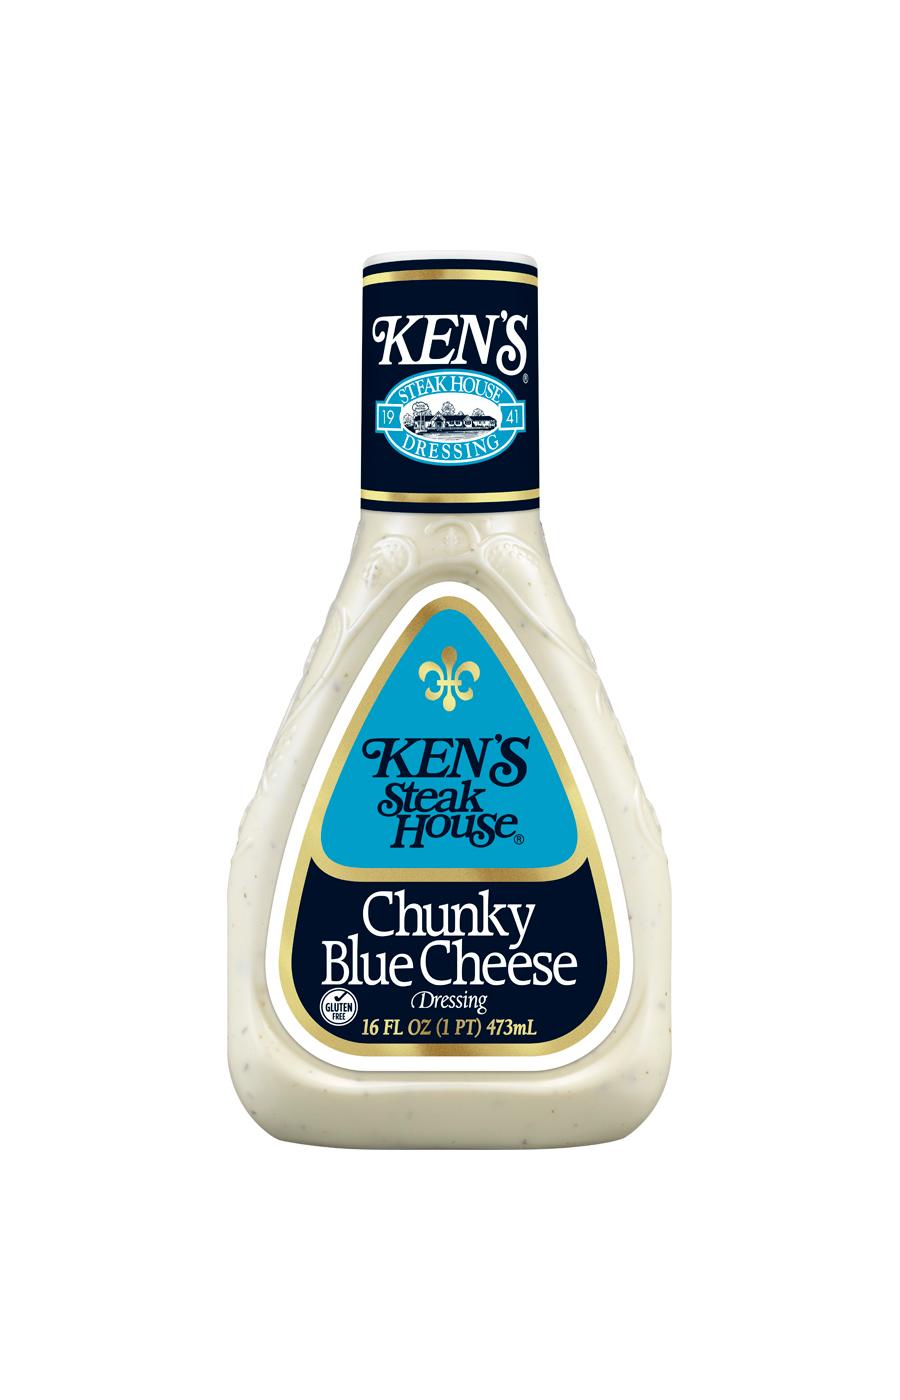 Ken's Steak House Chunky Blue Cheese Dressing; image 1 of 5